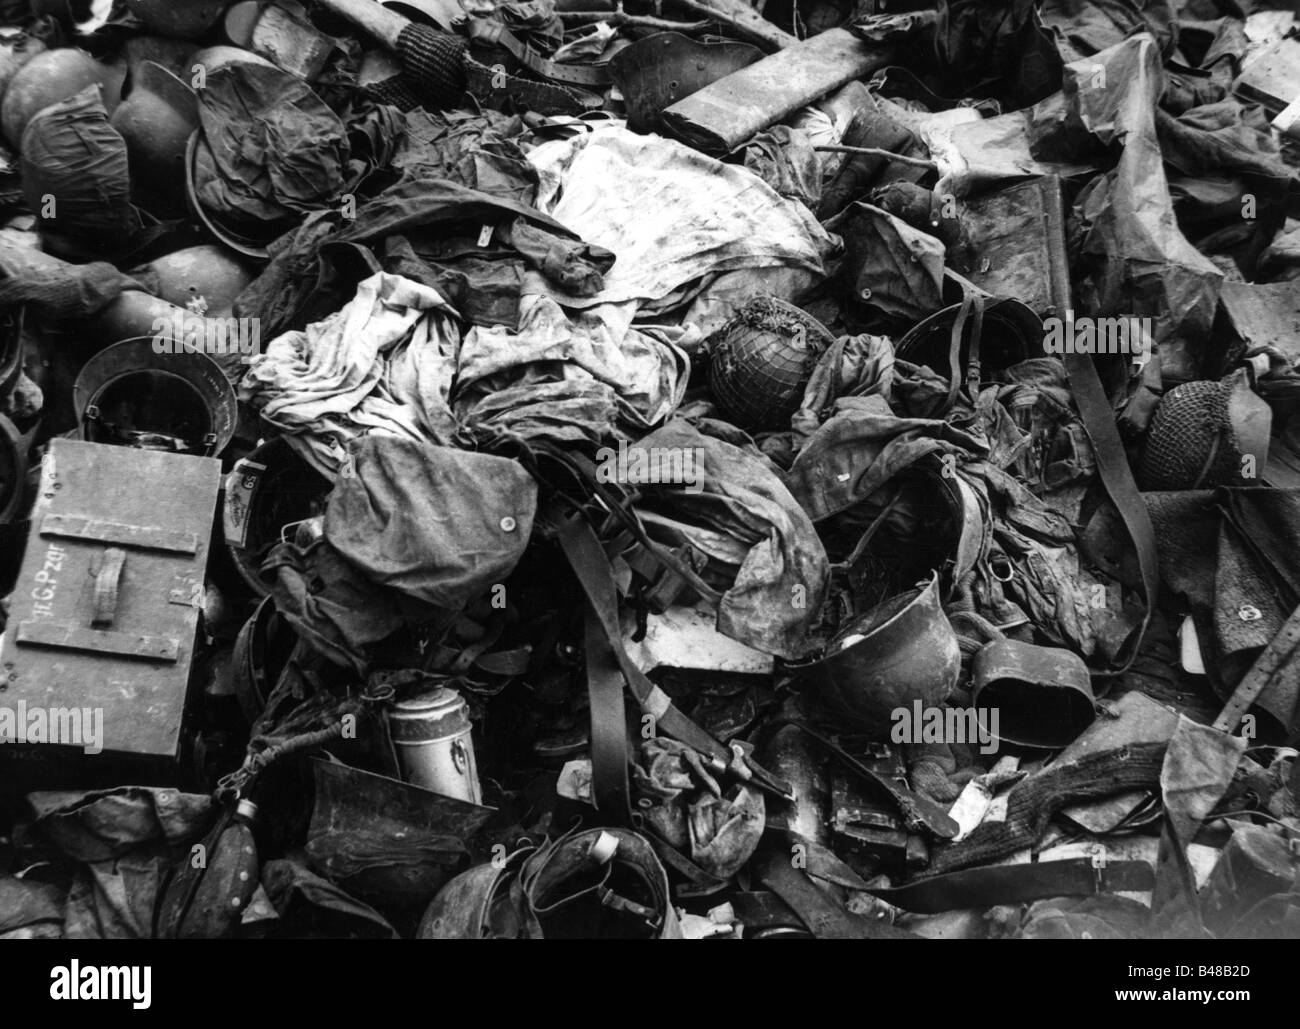 events, Second World War / WWII, France, Invasion 1944, during the German retreat from Normandy abandoned equipment, June / July 1944, Stock Photo